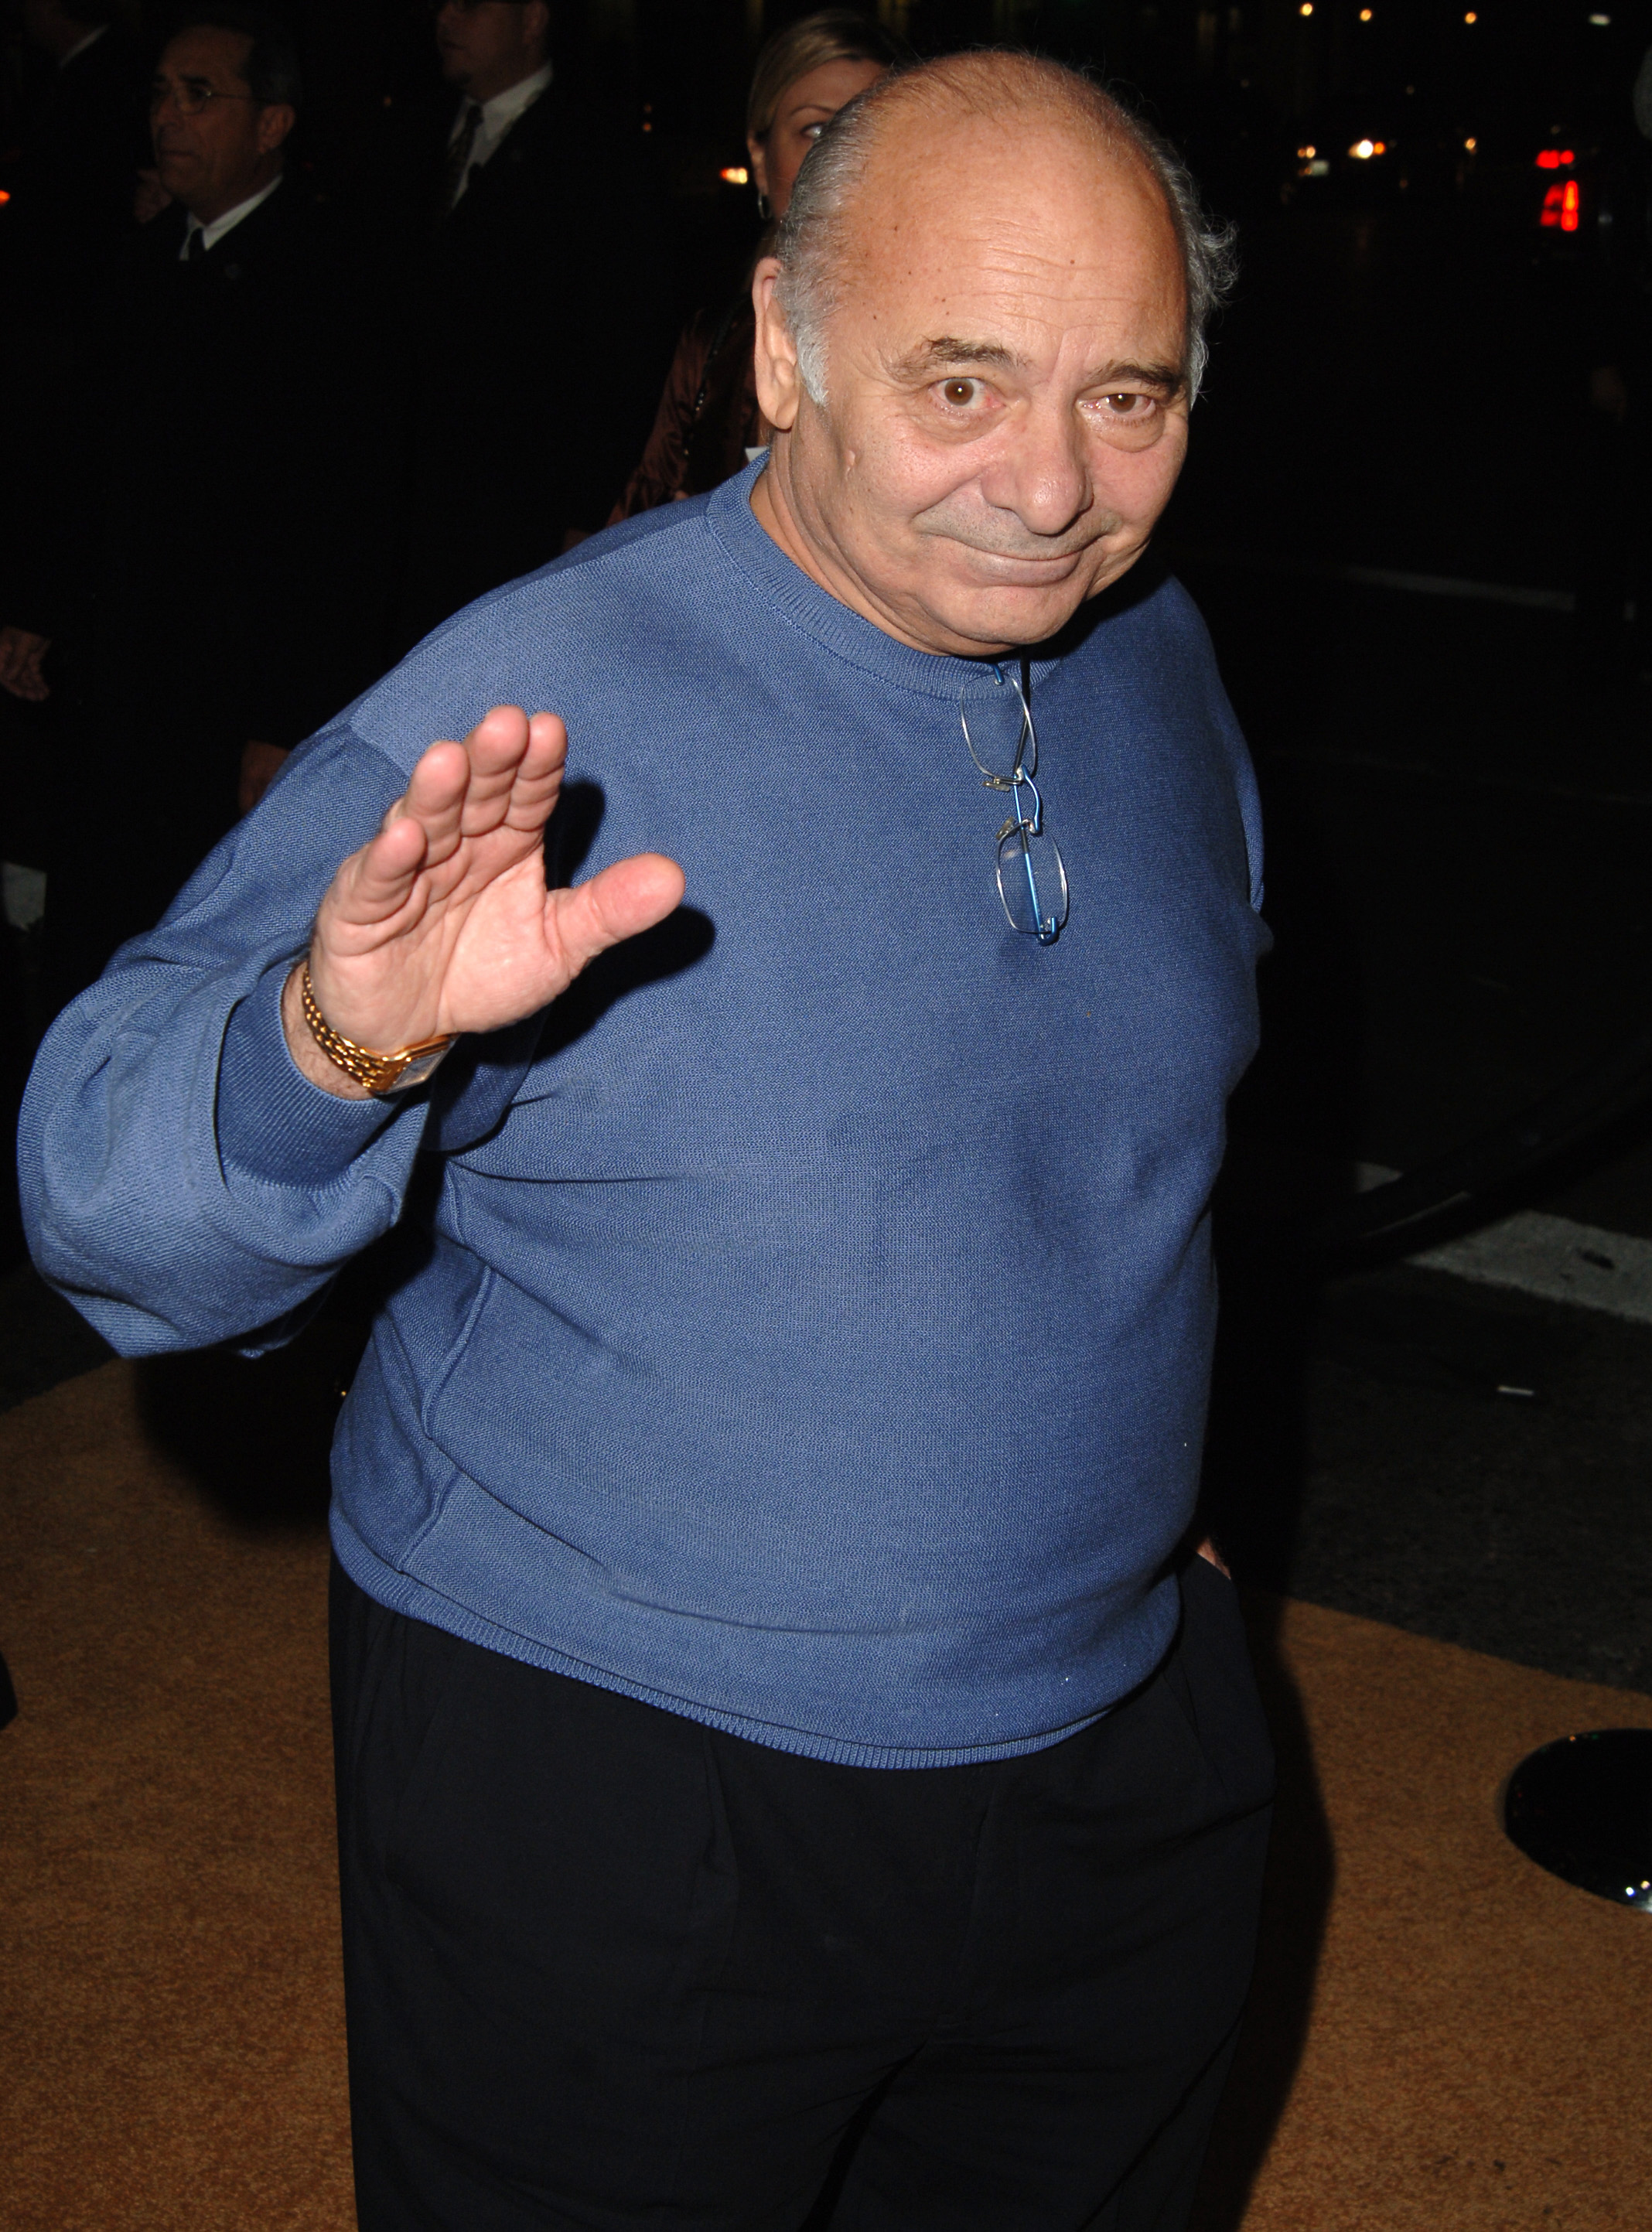 Burt Young at the "Rocky Balboa" World Premiere at Grauman's Chinese Theatre on December 13, 2006, in Hollywood, California. | Source: Getty Images